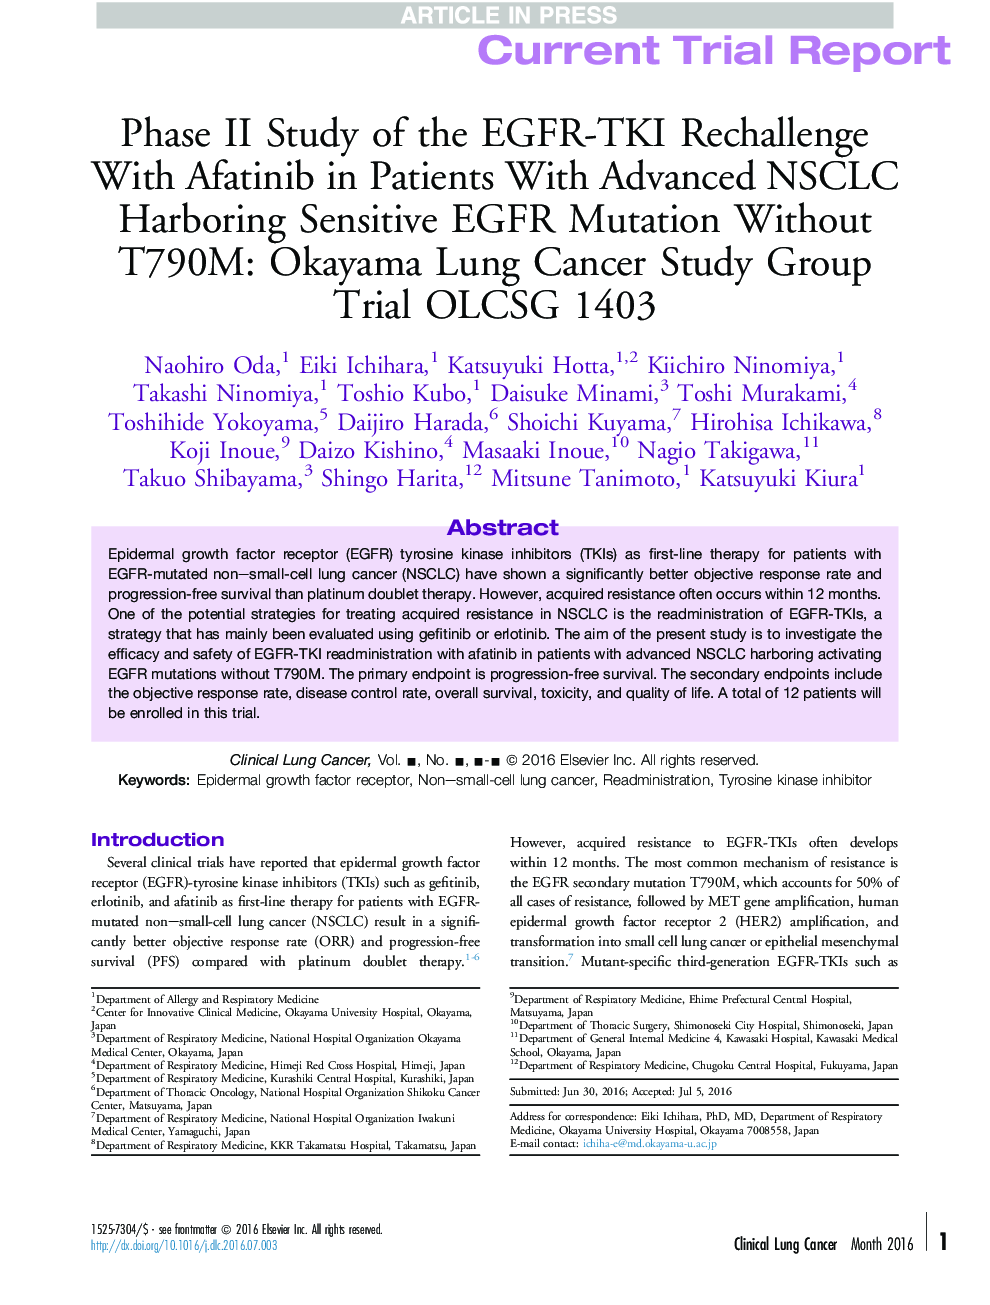 Phase II Study of the EGFR-TKI Rechallenge With Afatinib in Patients With Advanced NSCLC Harboring Sensitive EGFR Mutation Without T790M: Okayama Lung Cancer Study Group Trial OLCSG 1403